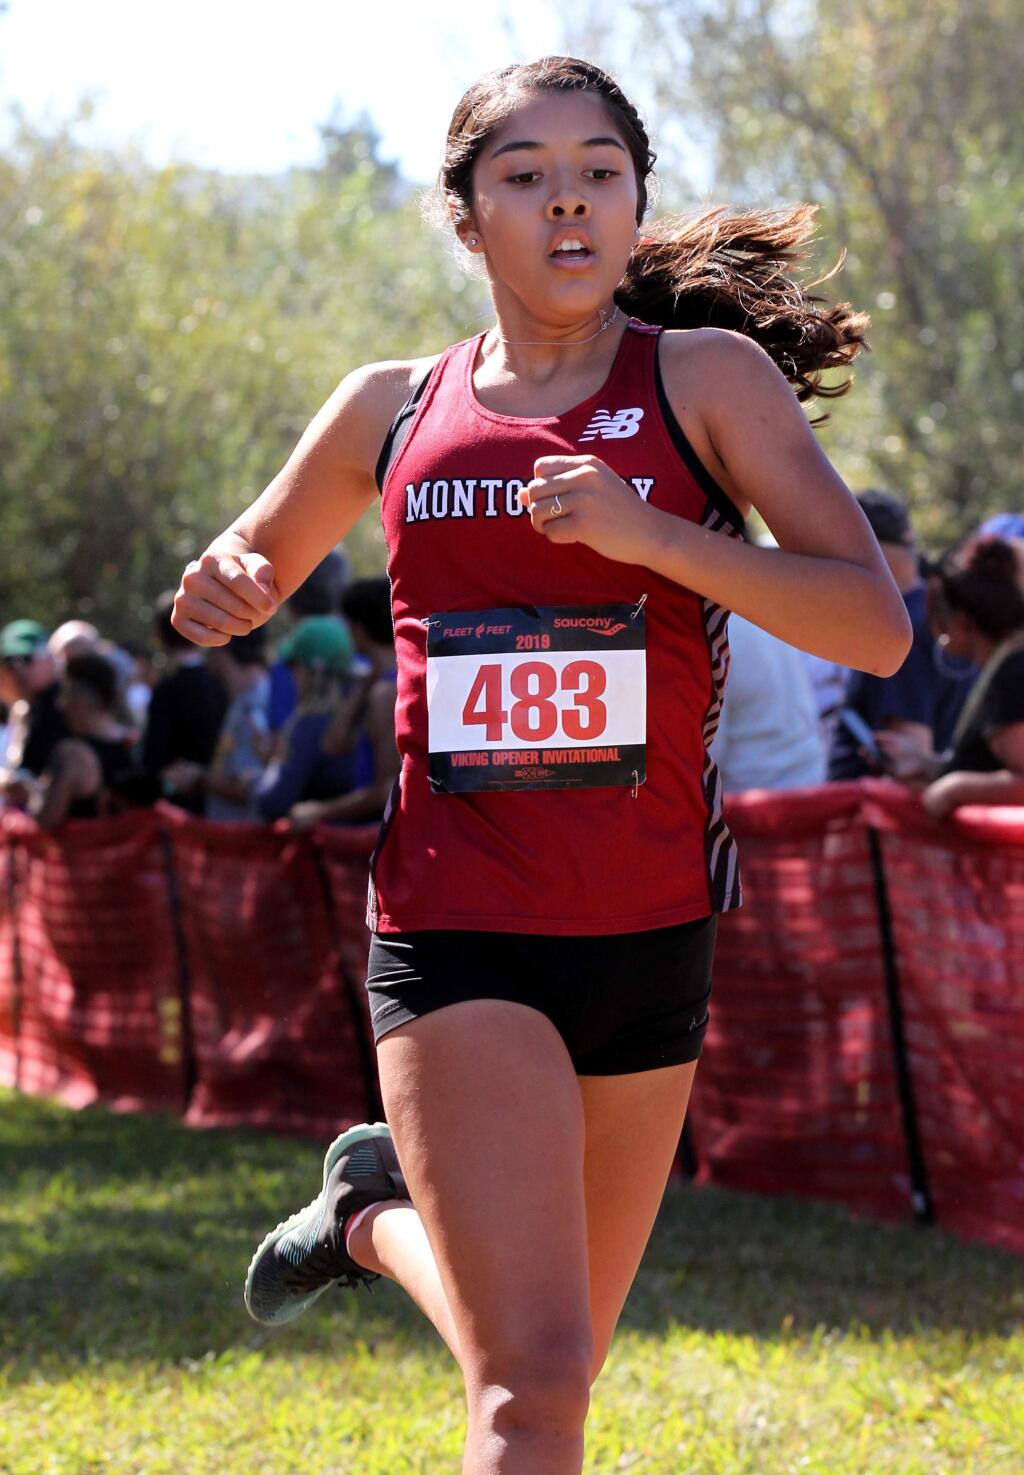 Mariah Briceno of Montgomery High finishes in fourth place in the junior-senior girls race at the school’s Viking Opener Invitational, held at Spring Lake Regional Park in Santa Rosa on Saturday, Sept. 14, 2019. (Darryl Bush / for The Press Democrat)